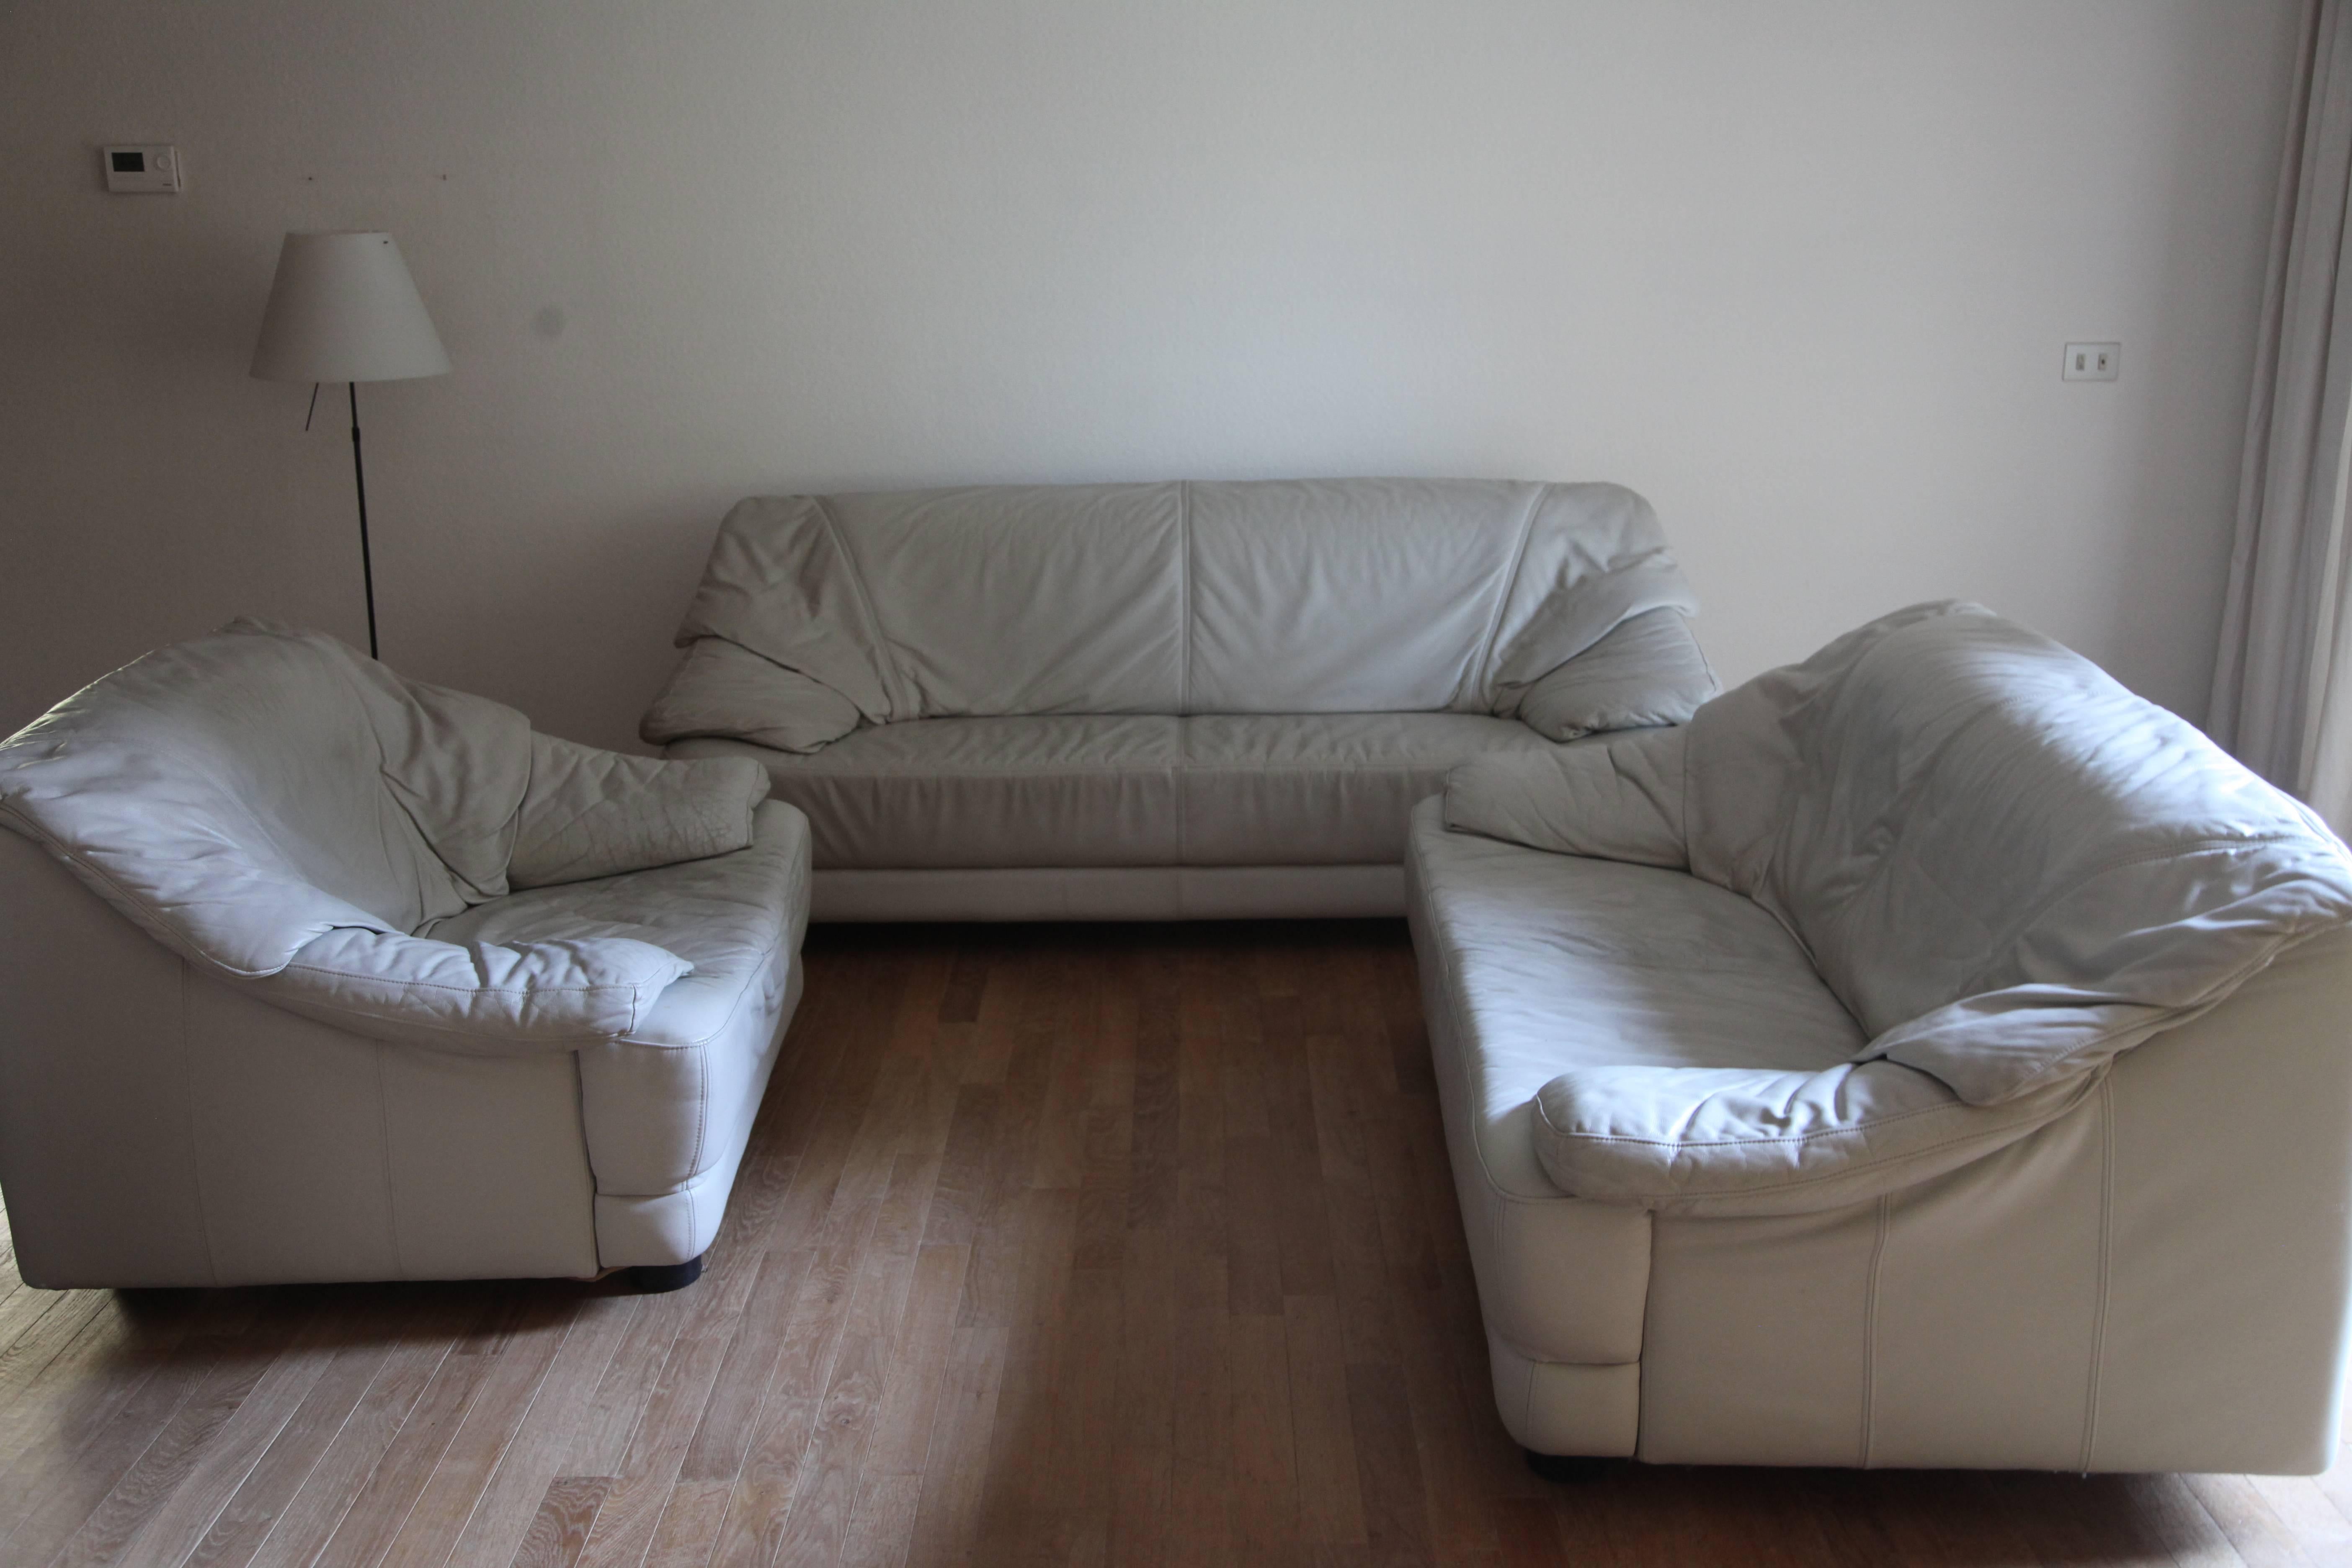 This set in white leather of a three-seat a two-seat and a single-seat designed in Italy, 1970s in style of Cassina is a beautiful setting for your gallery, living room or office and very comfortable.
All sofa's are in a good condition featured in